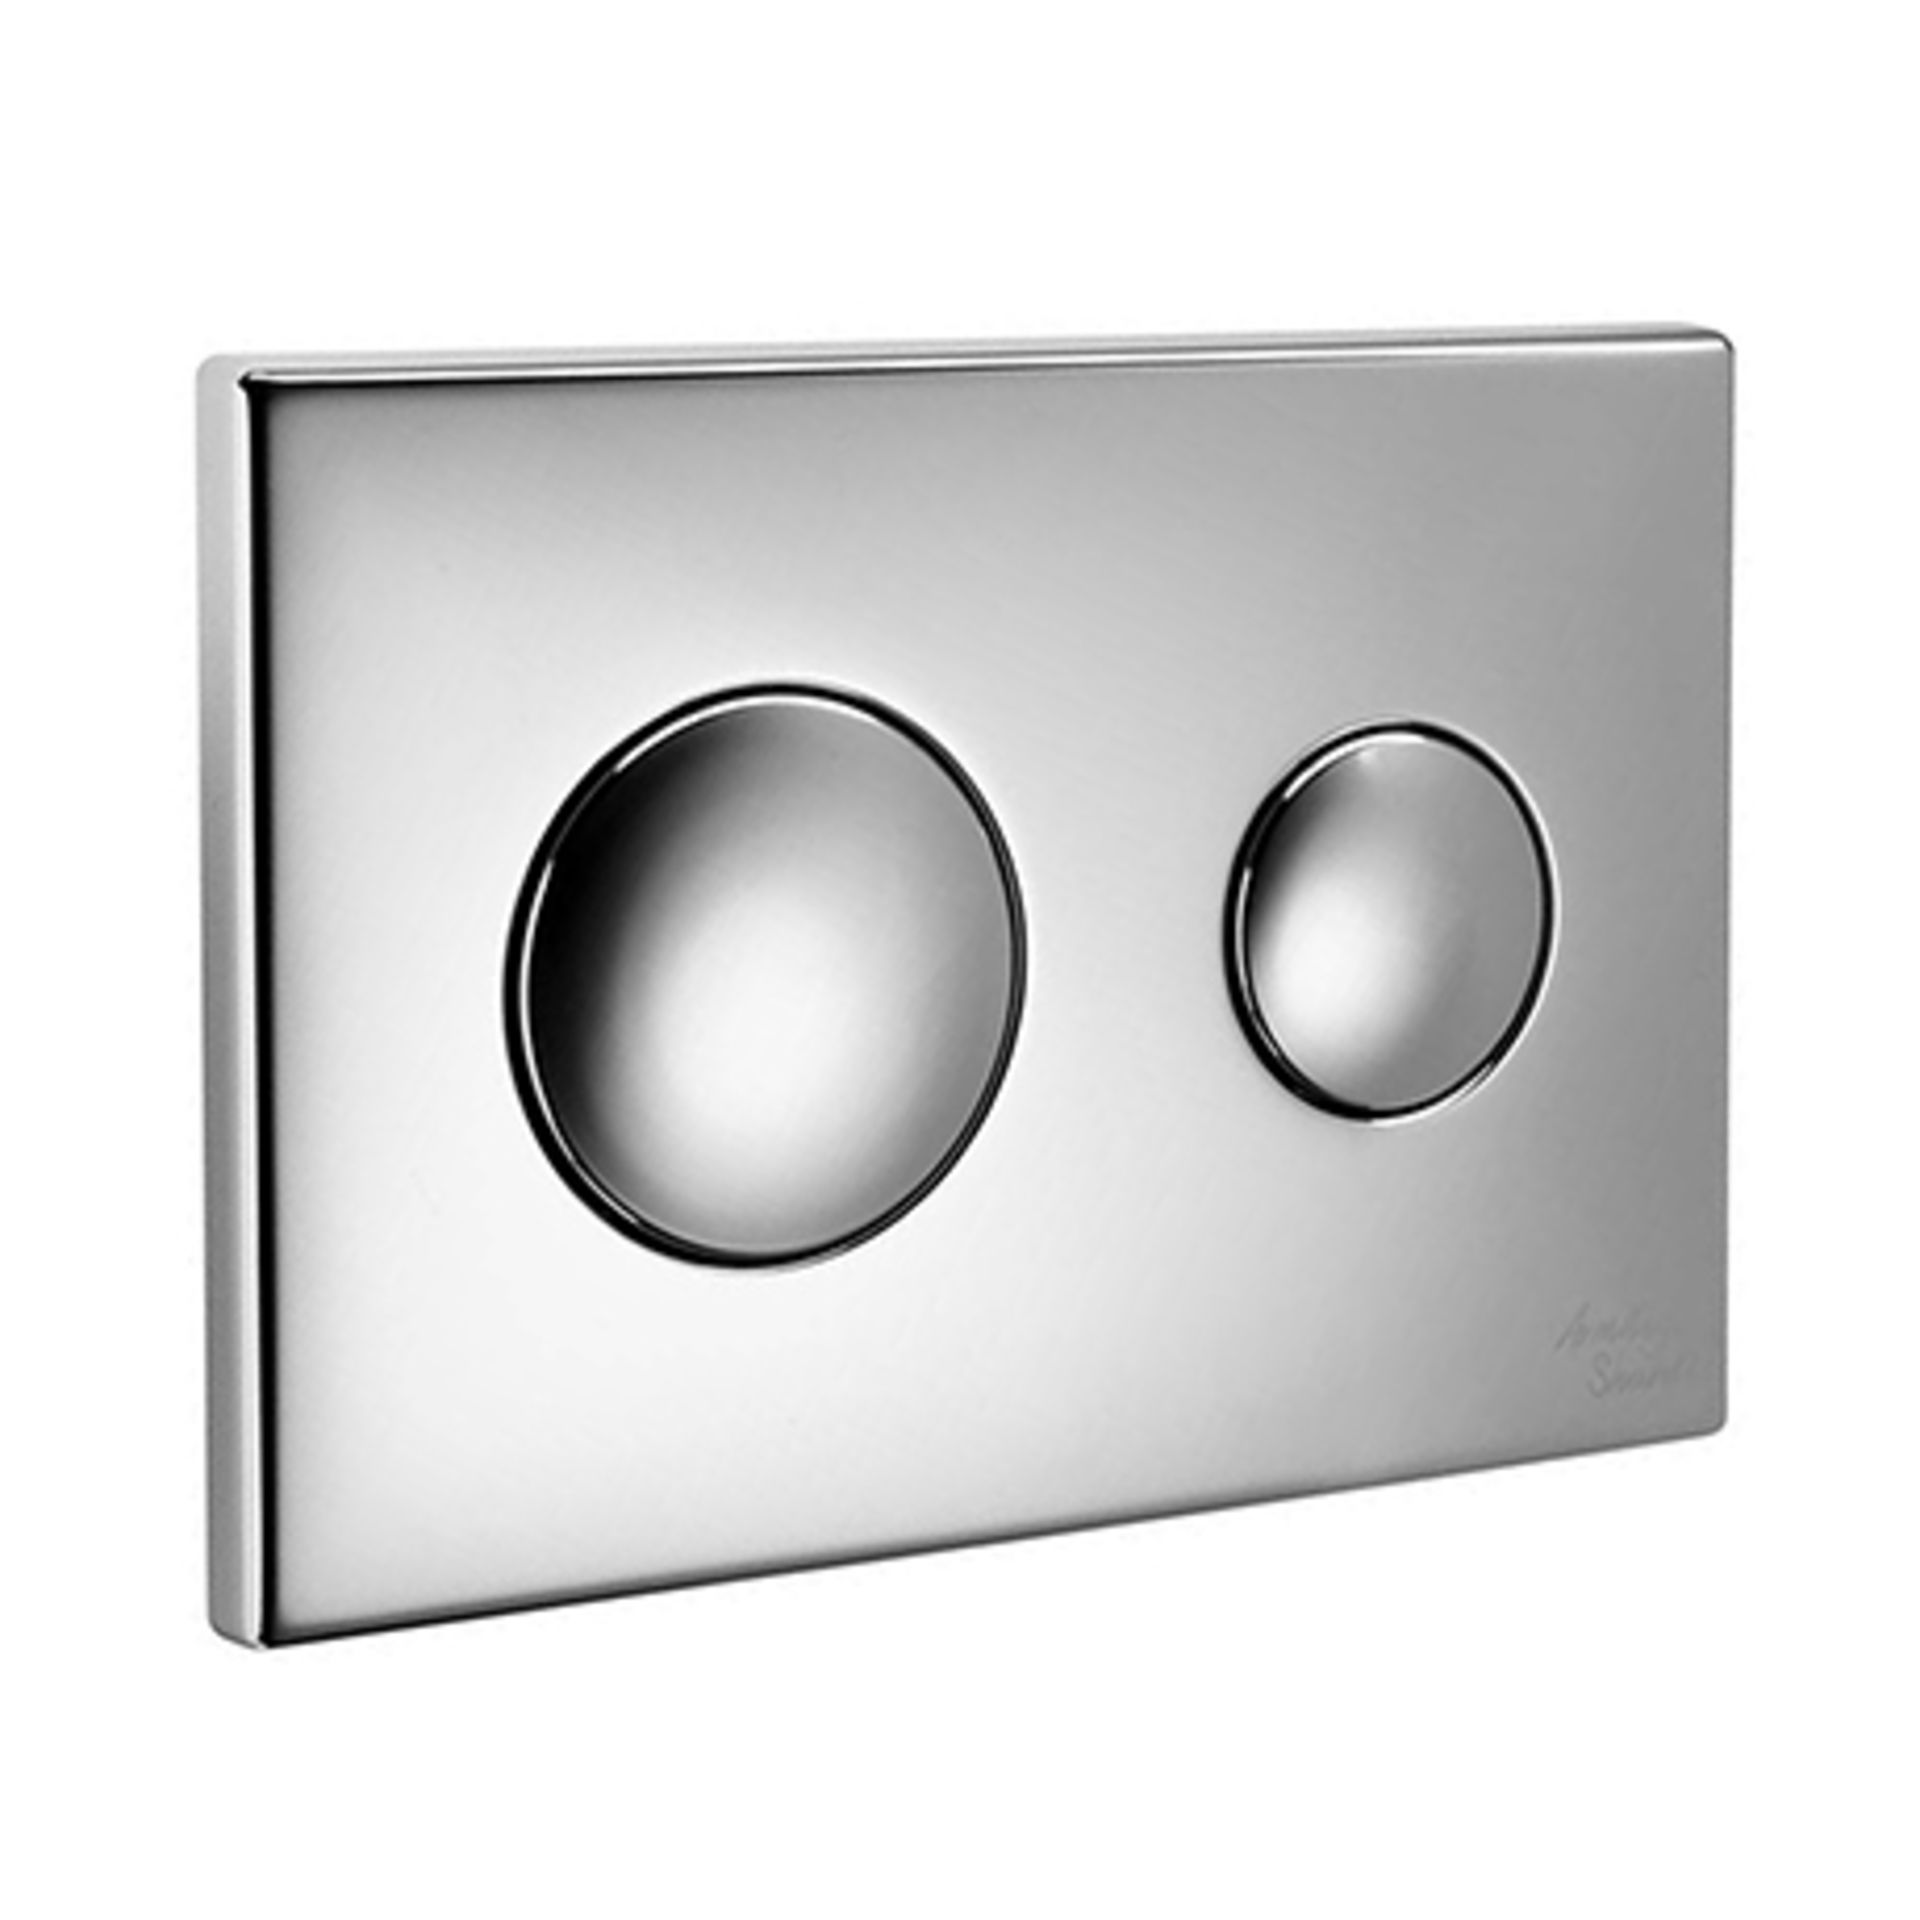 RRP £180. 3 x Ideal Standard Conceala 2 dual flush plate S4399AA. NEW